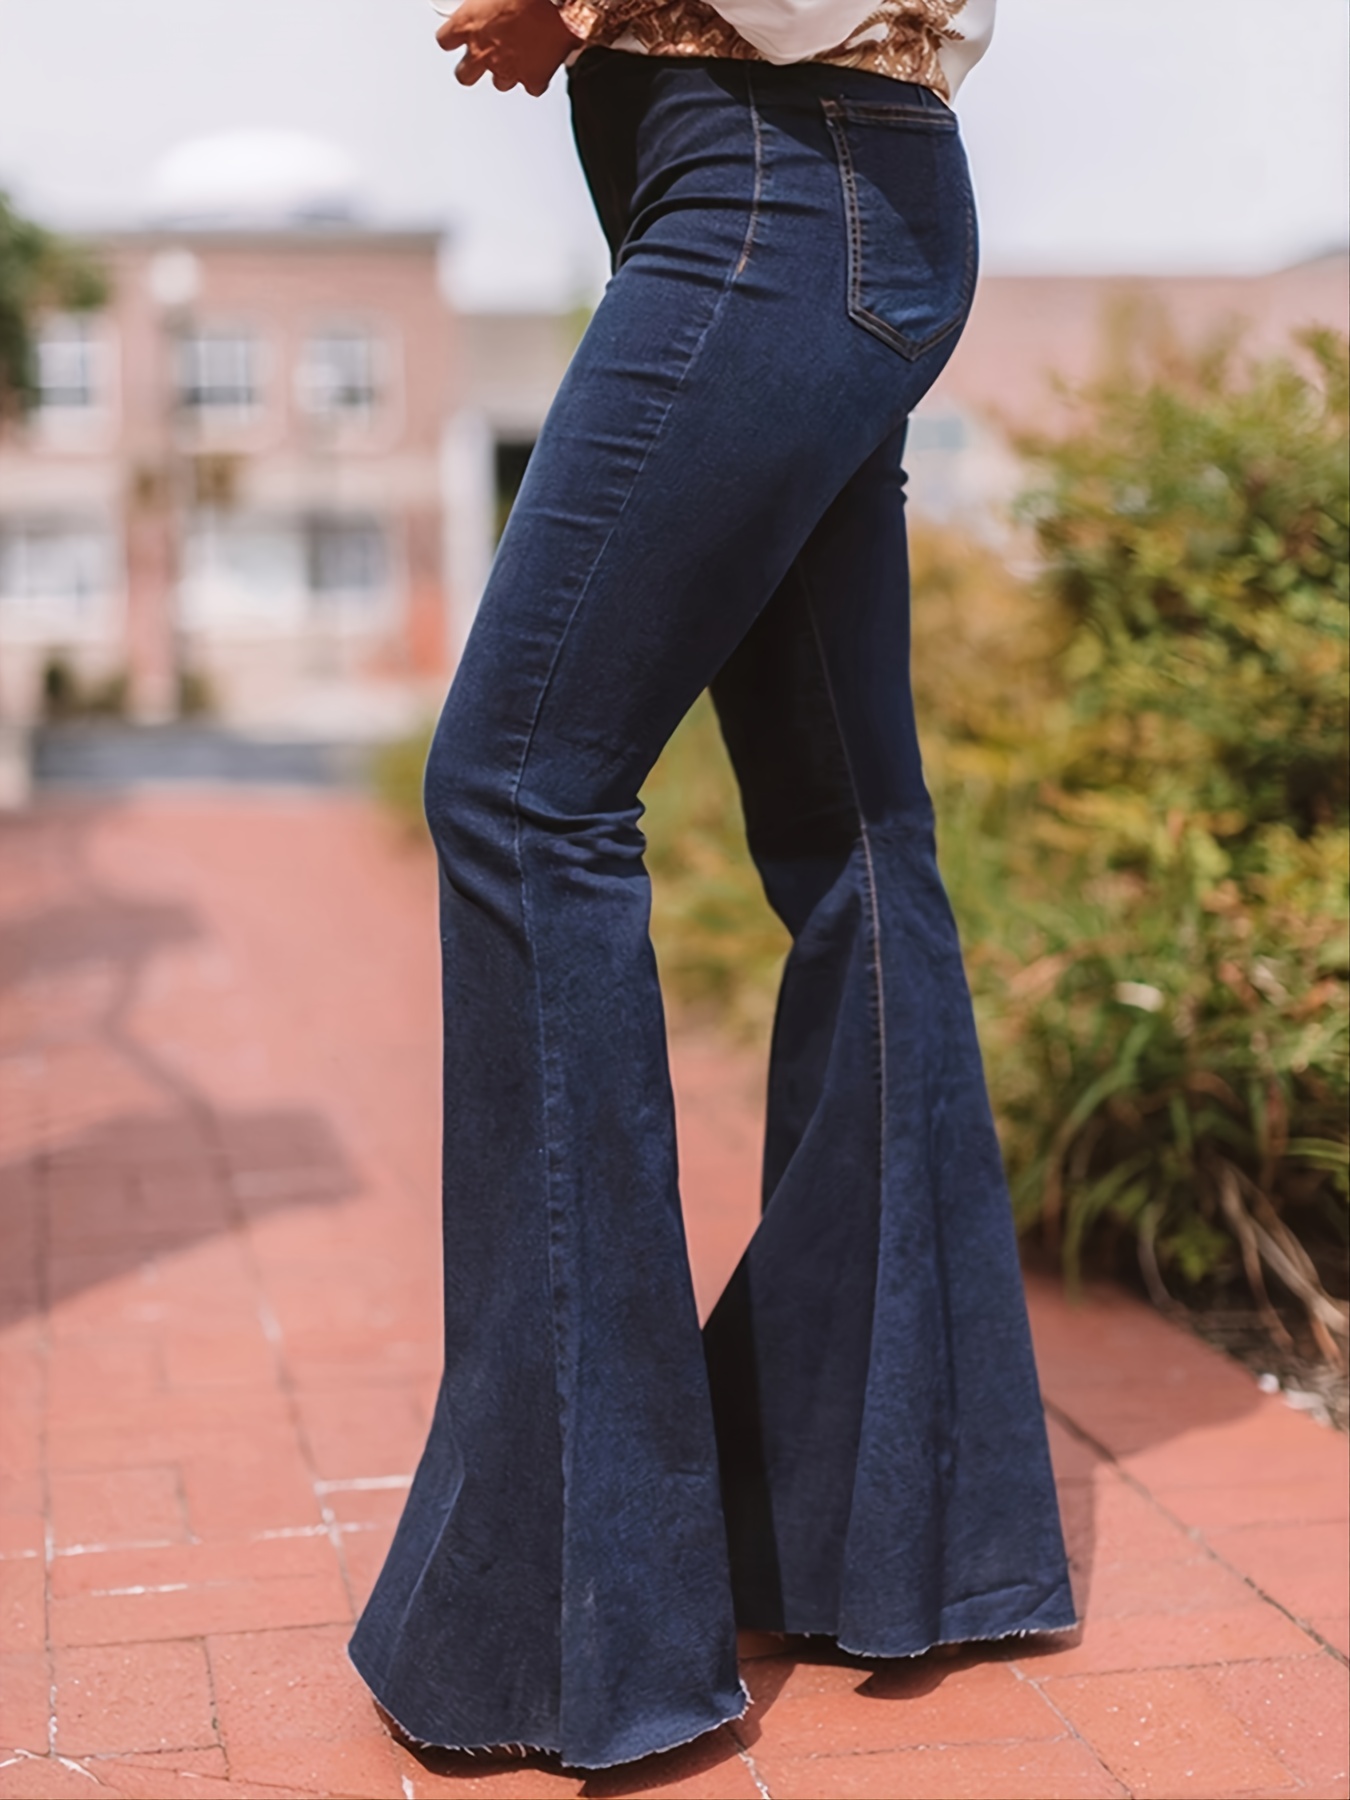 Women's Flared Pants Hipster Jeans Slim Fit Stretch Skinny Jeans